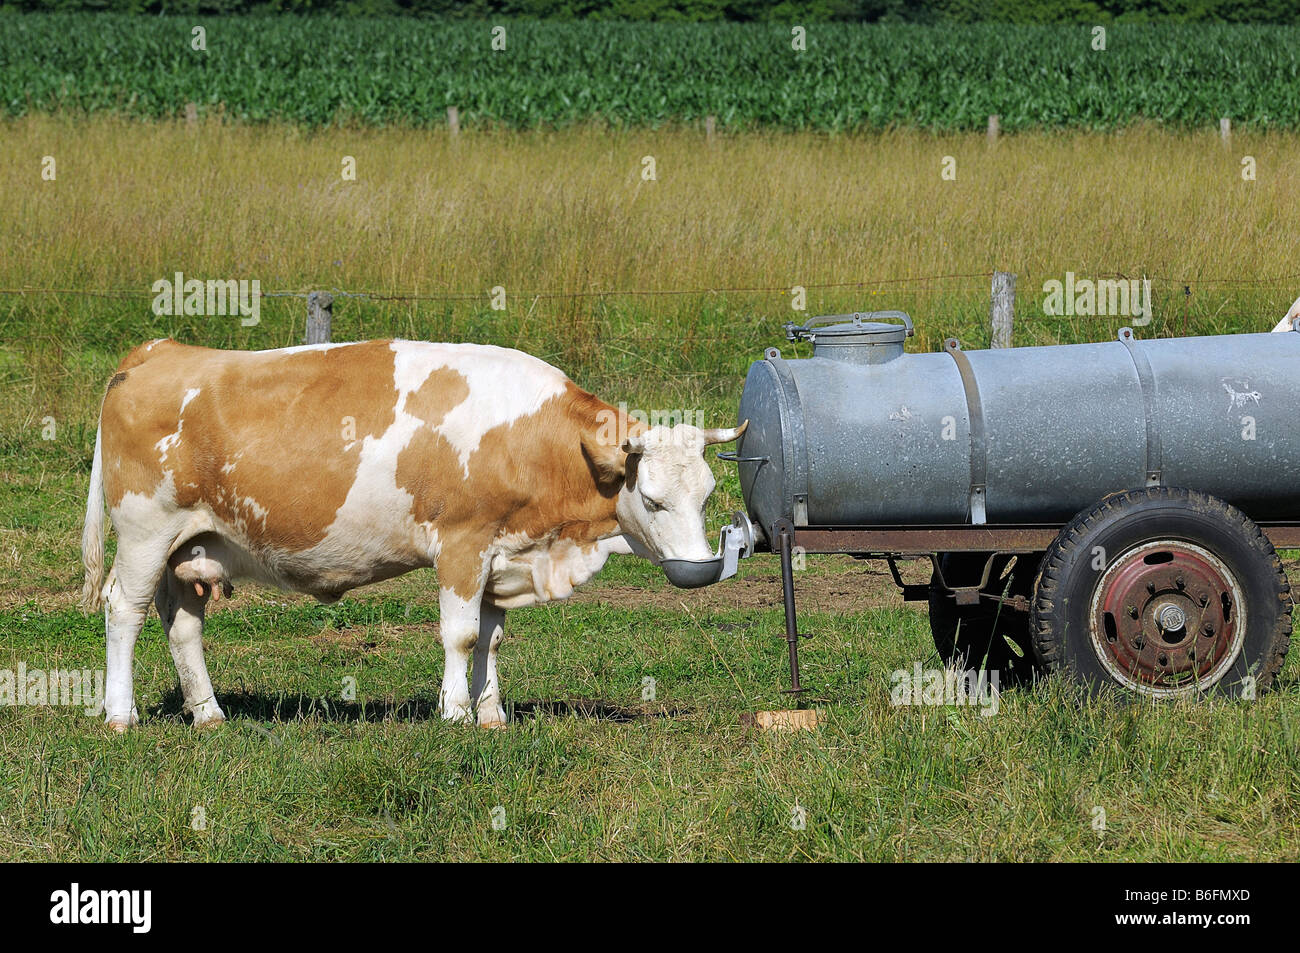 Cow drinking from a barrel of water, Upper Bavaria, Germany, Europe Stock Photo